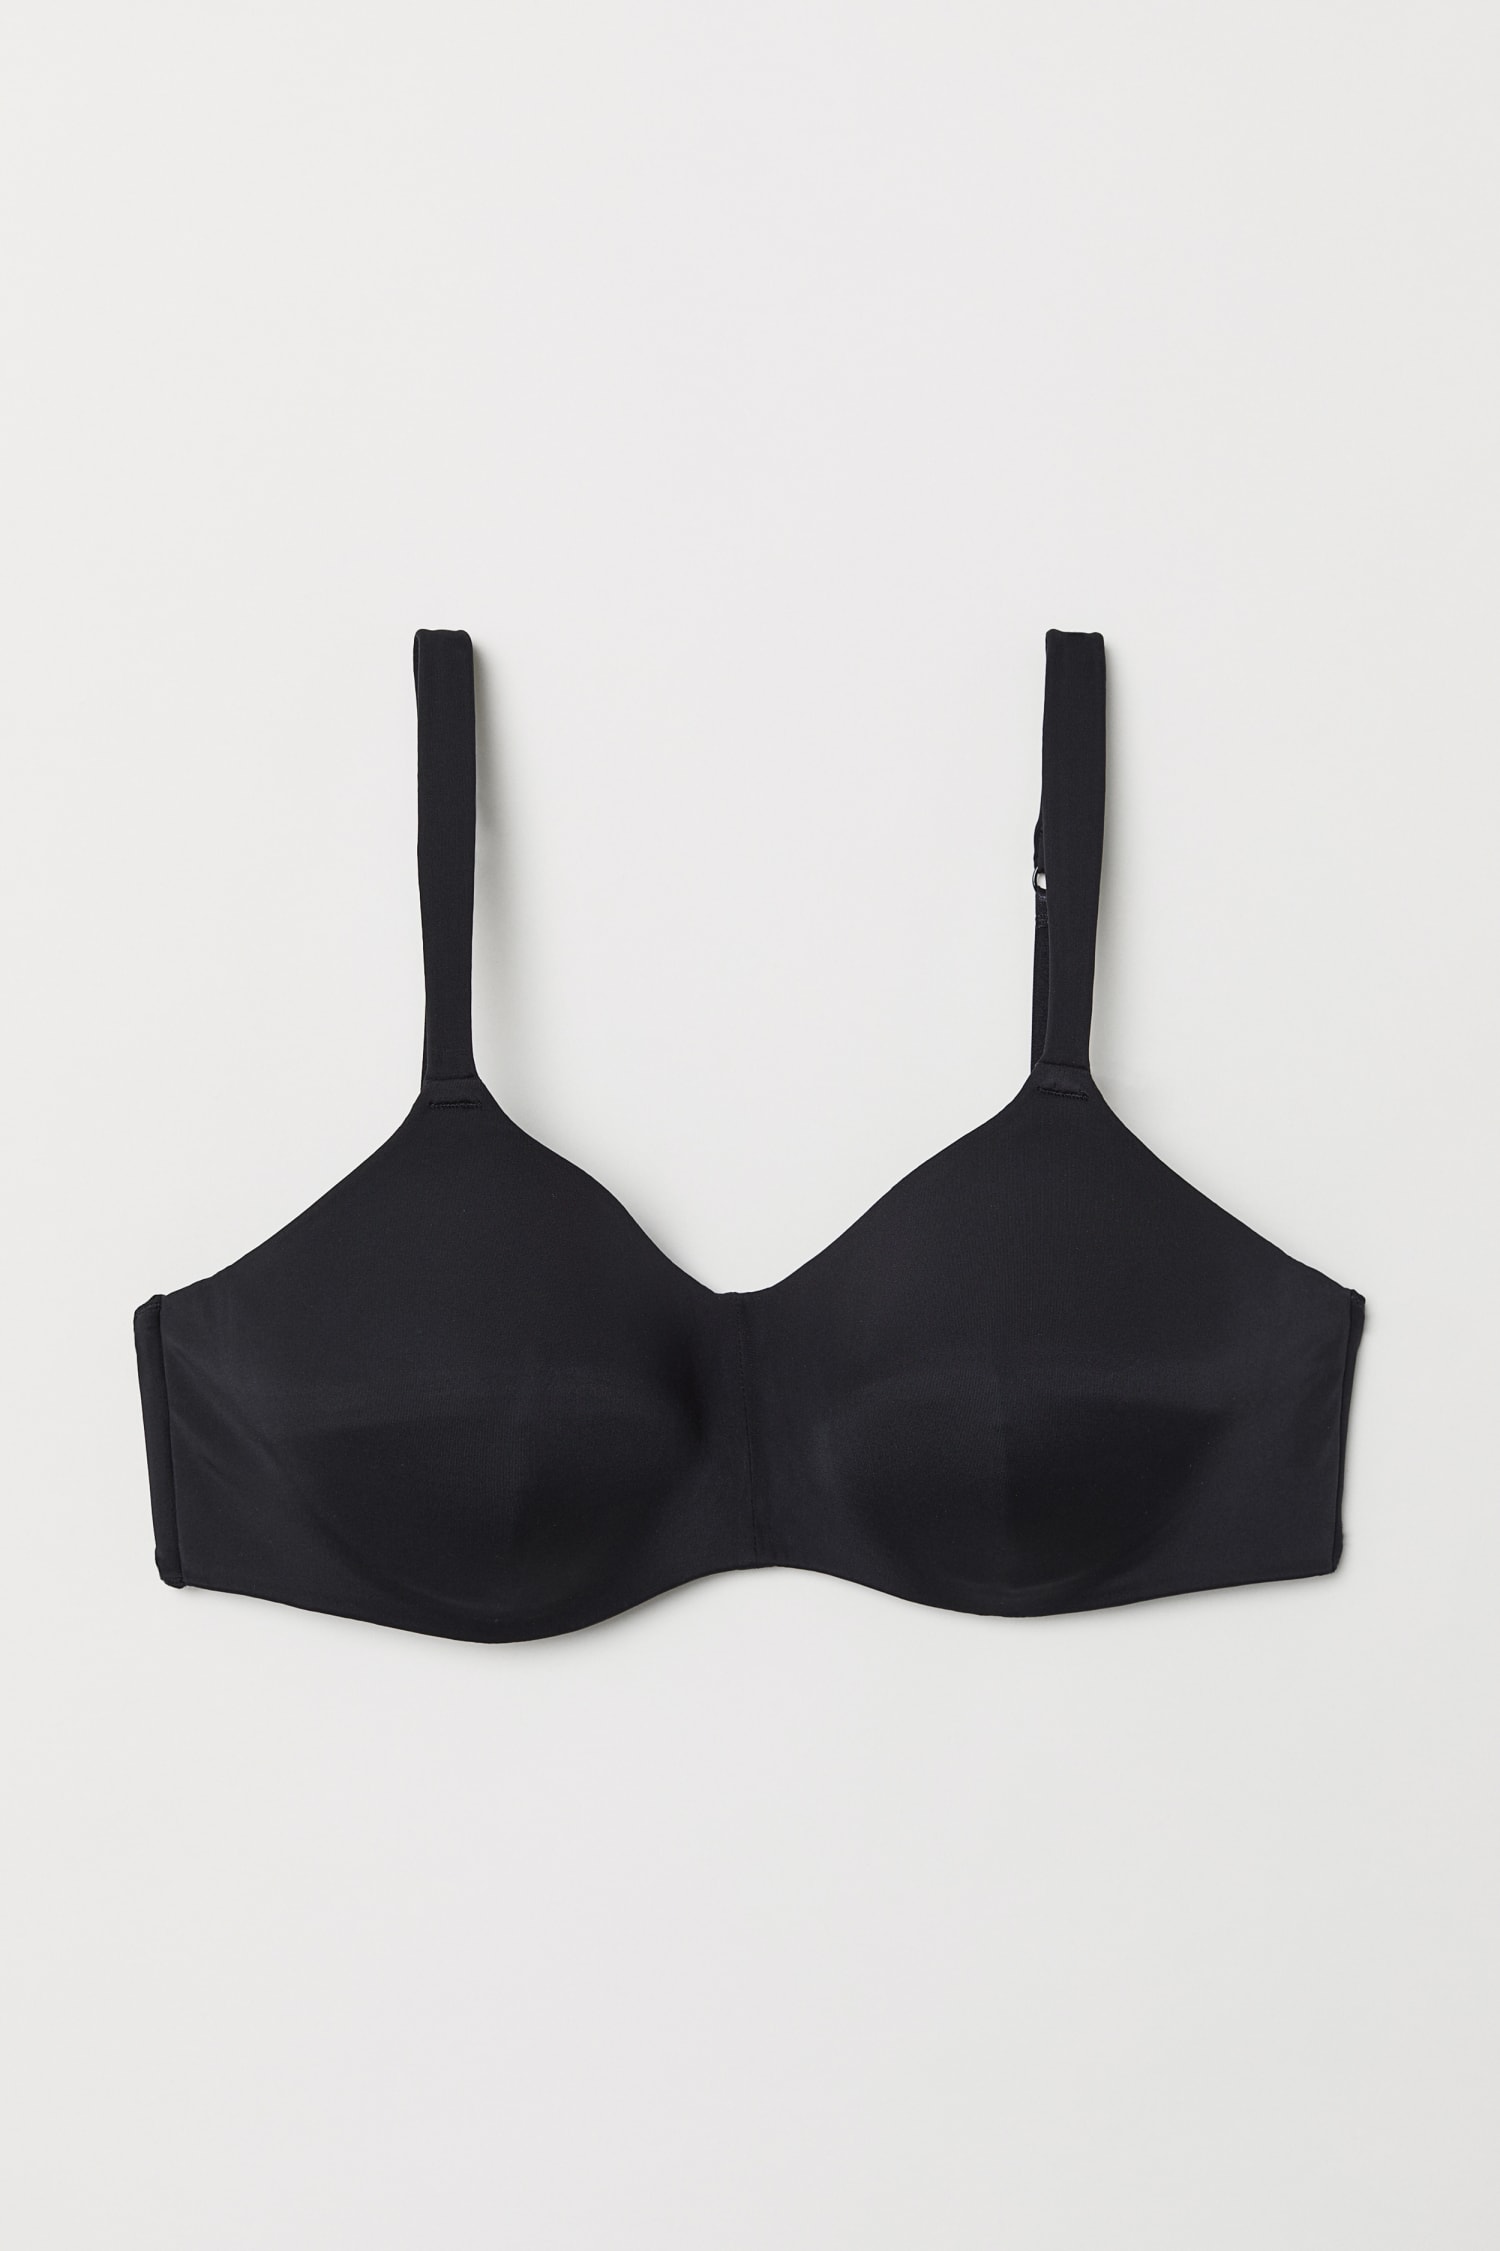 H&M launches a new bra collection designed for breast cancer survivors